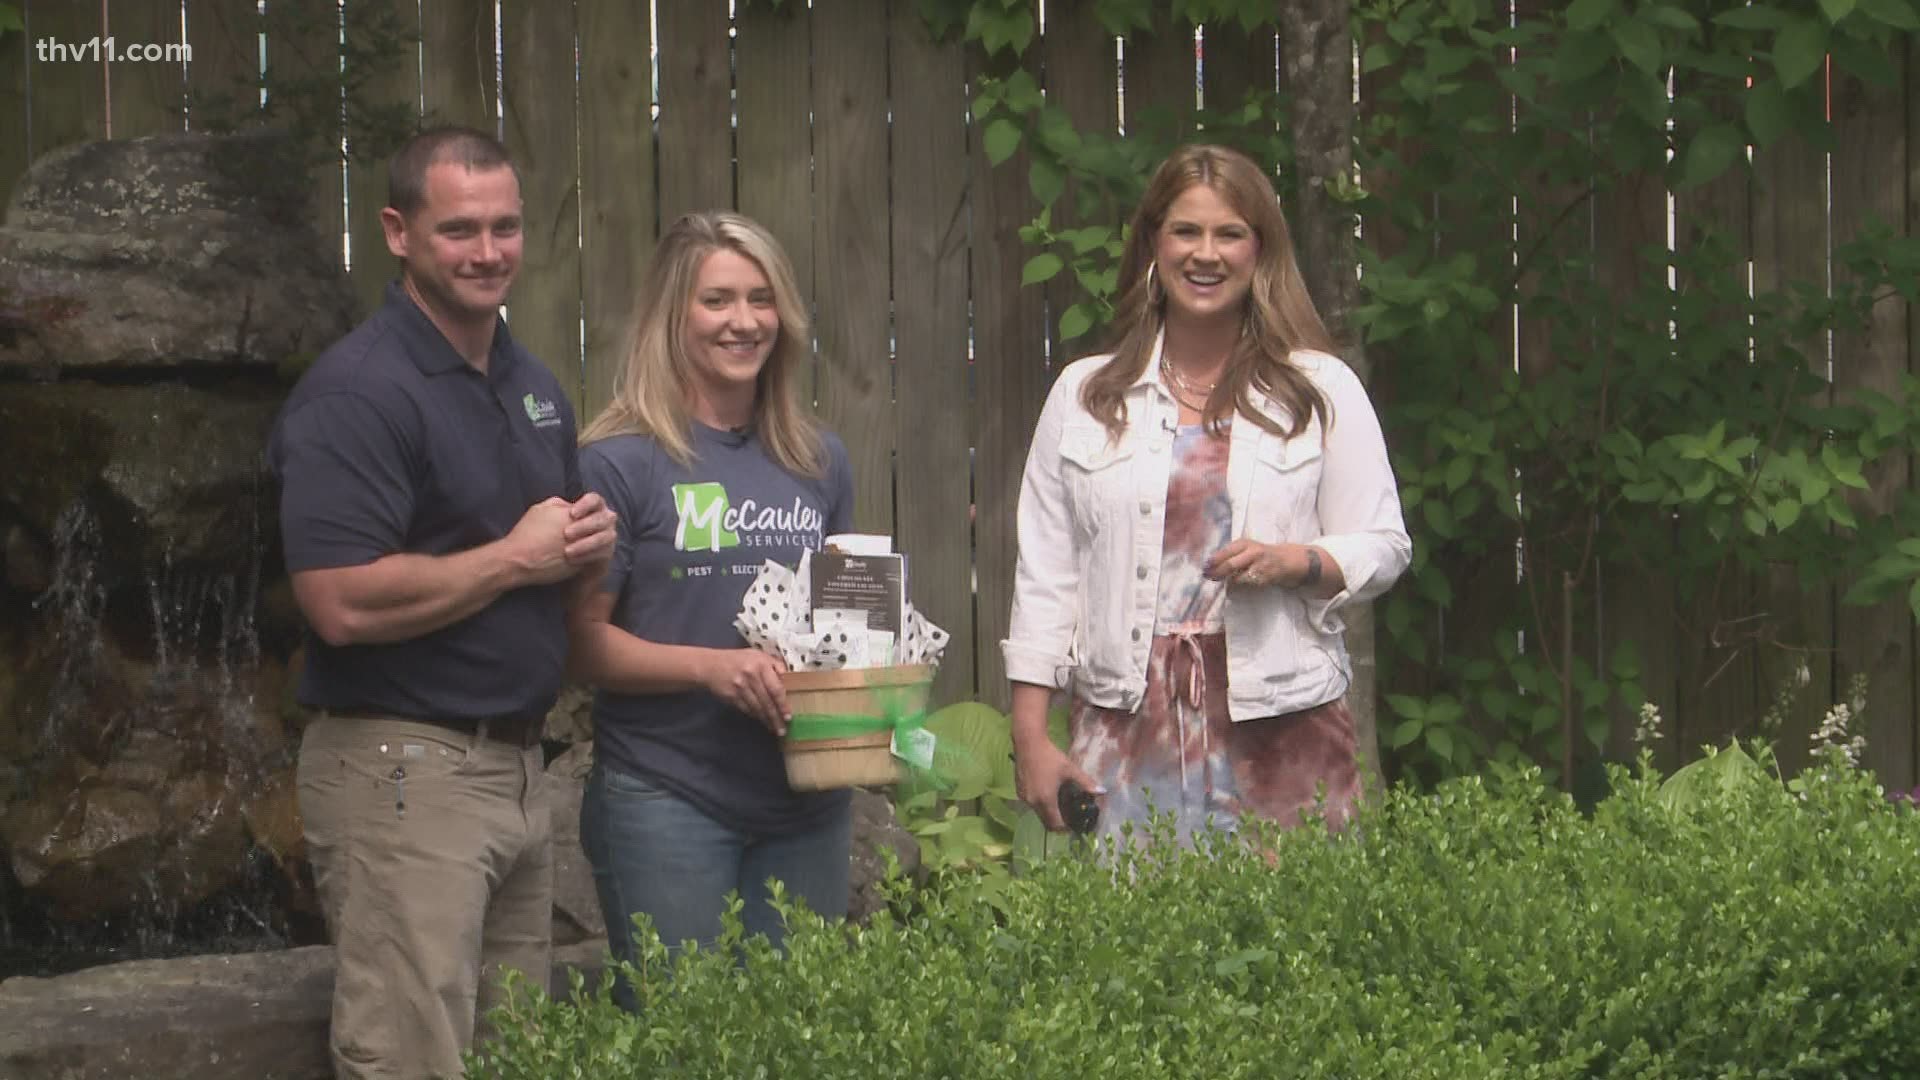 Summertime in Arkansas means getting outdoors, which also means bugs! Justin and Jen McCauley with McCauley Services share advice for tackling those pests.